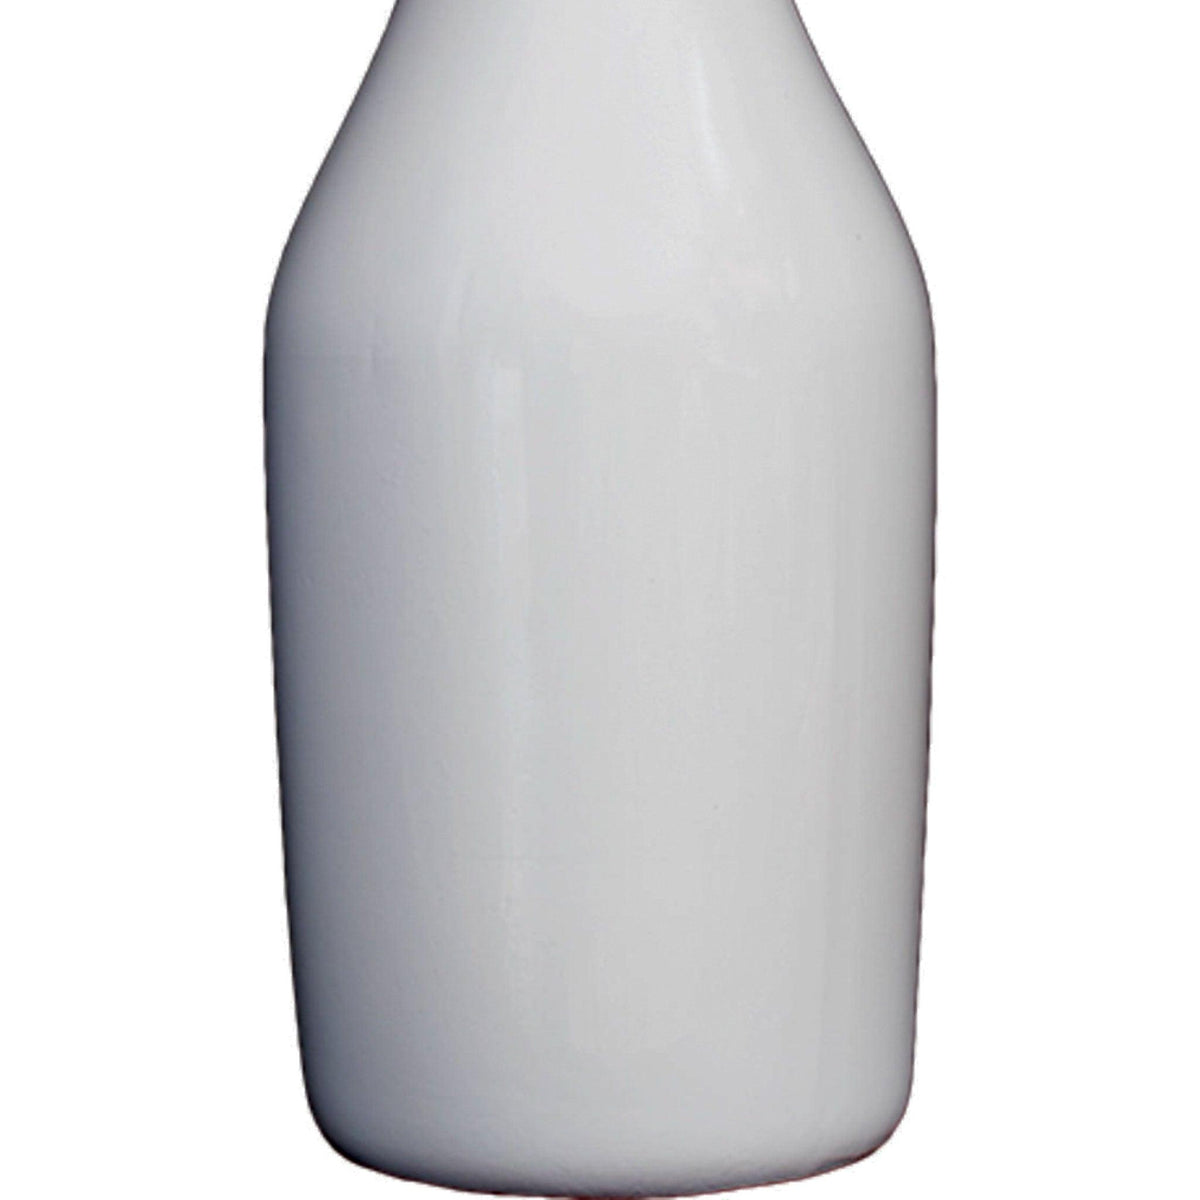 Lee Display's brand new Milk Bottle Shaped Ceramic Vase comes in a high gloss white finish on sale at leedisplay.com